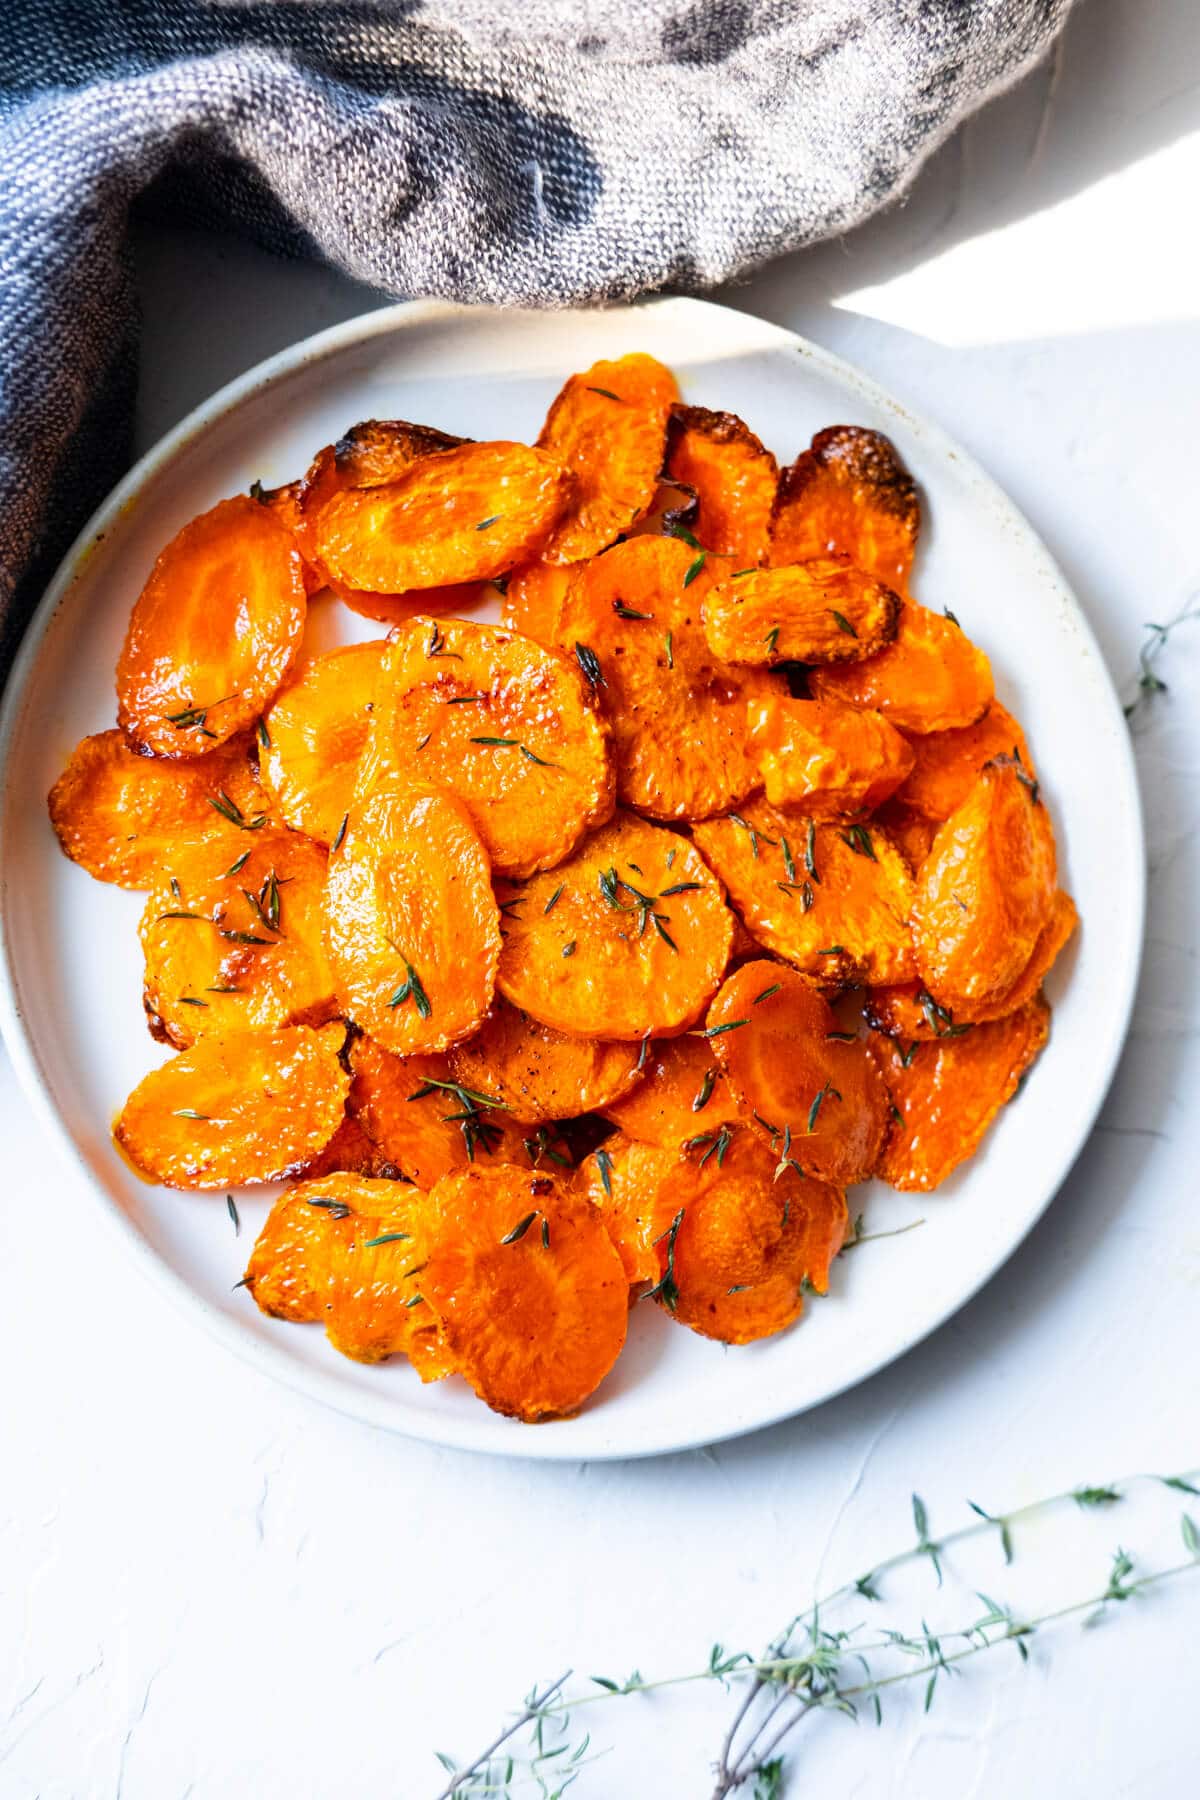 Roasted carrots with thyme on top is served in a white shallow plate.